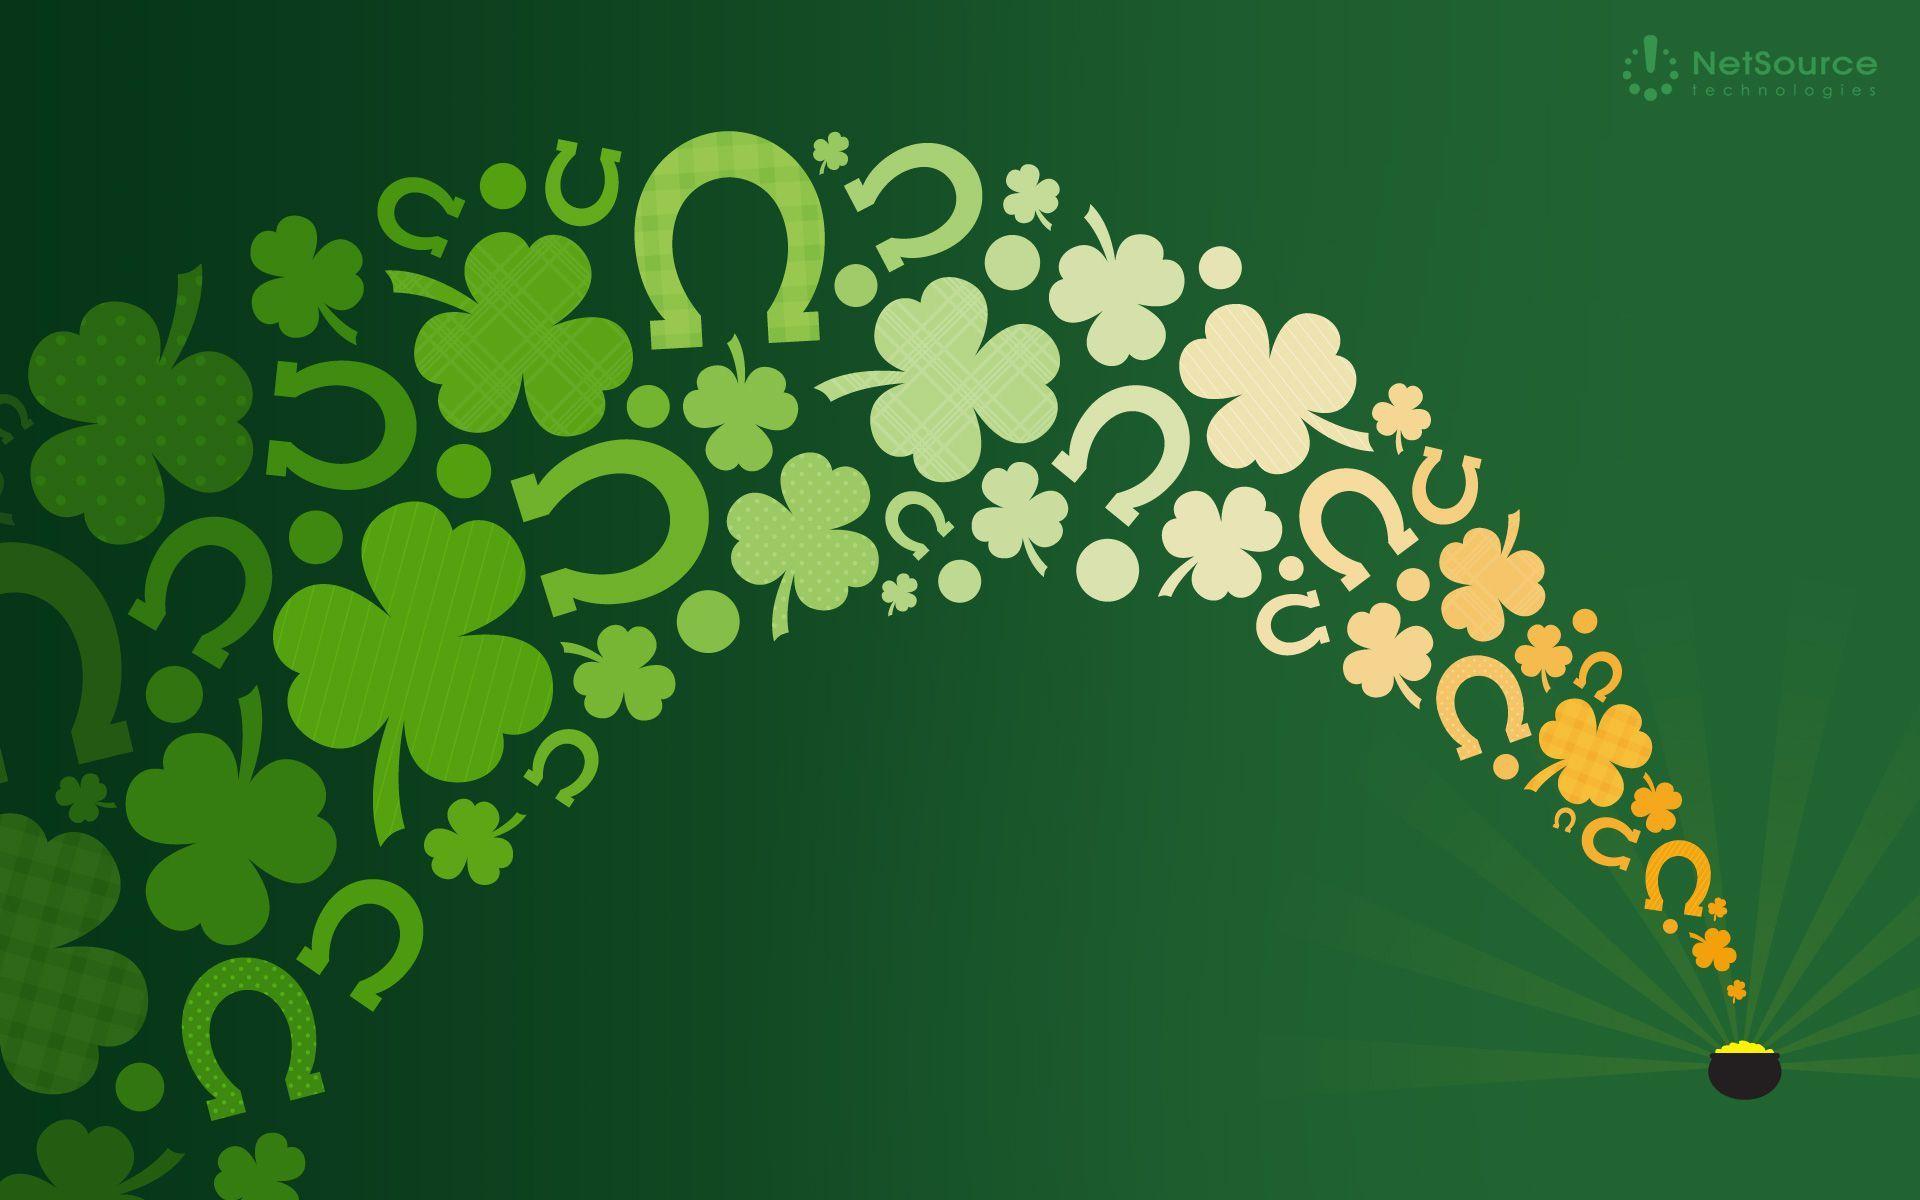 Green on the background of saint Patricks day HD wallpaper download